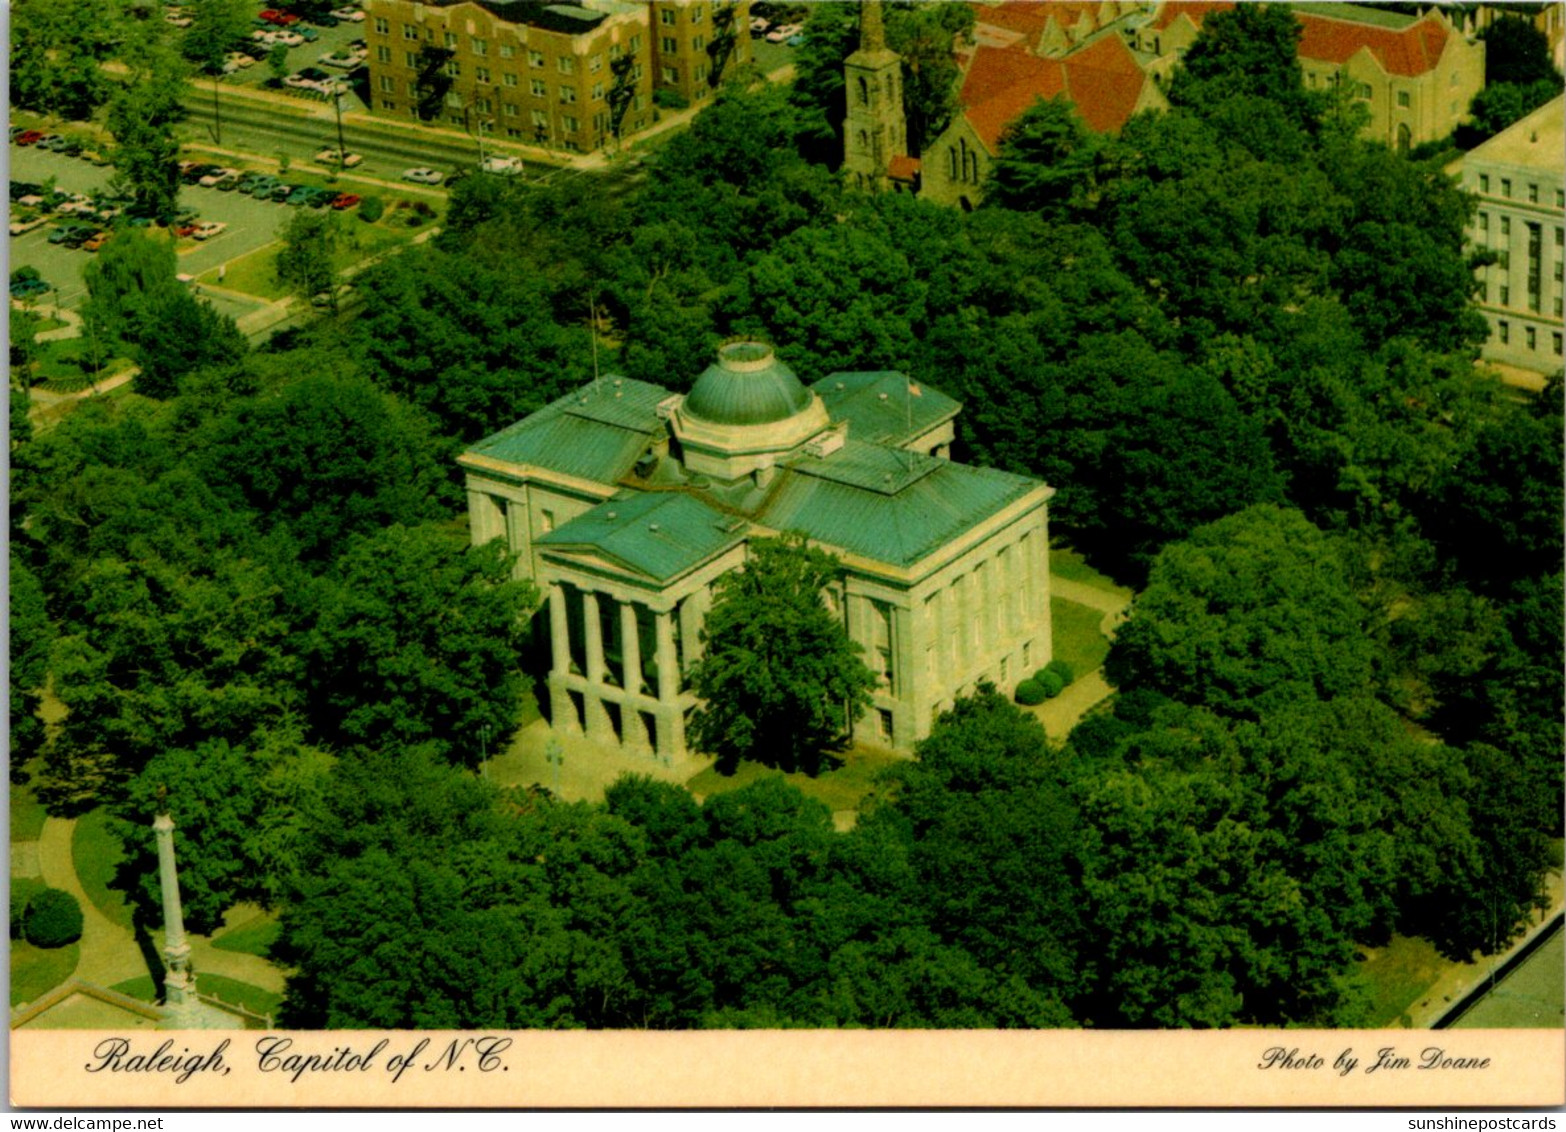 North Carolina Aerial View Of State Captiol Building - Raleigh